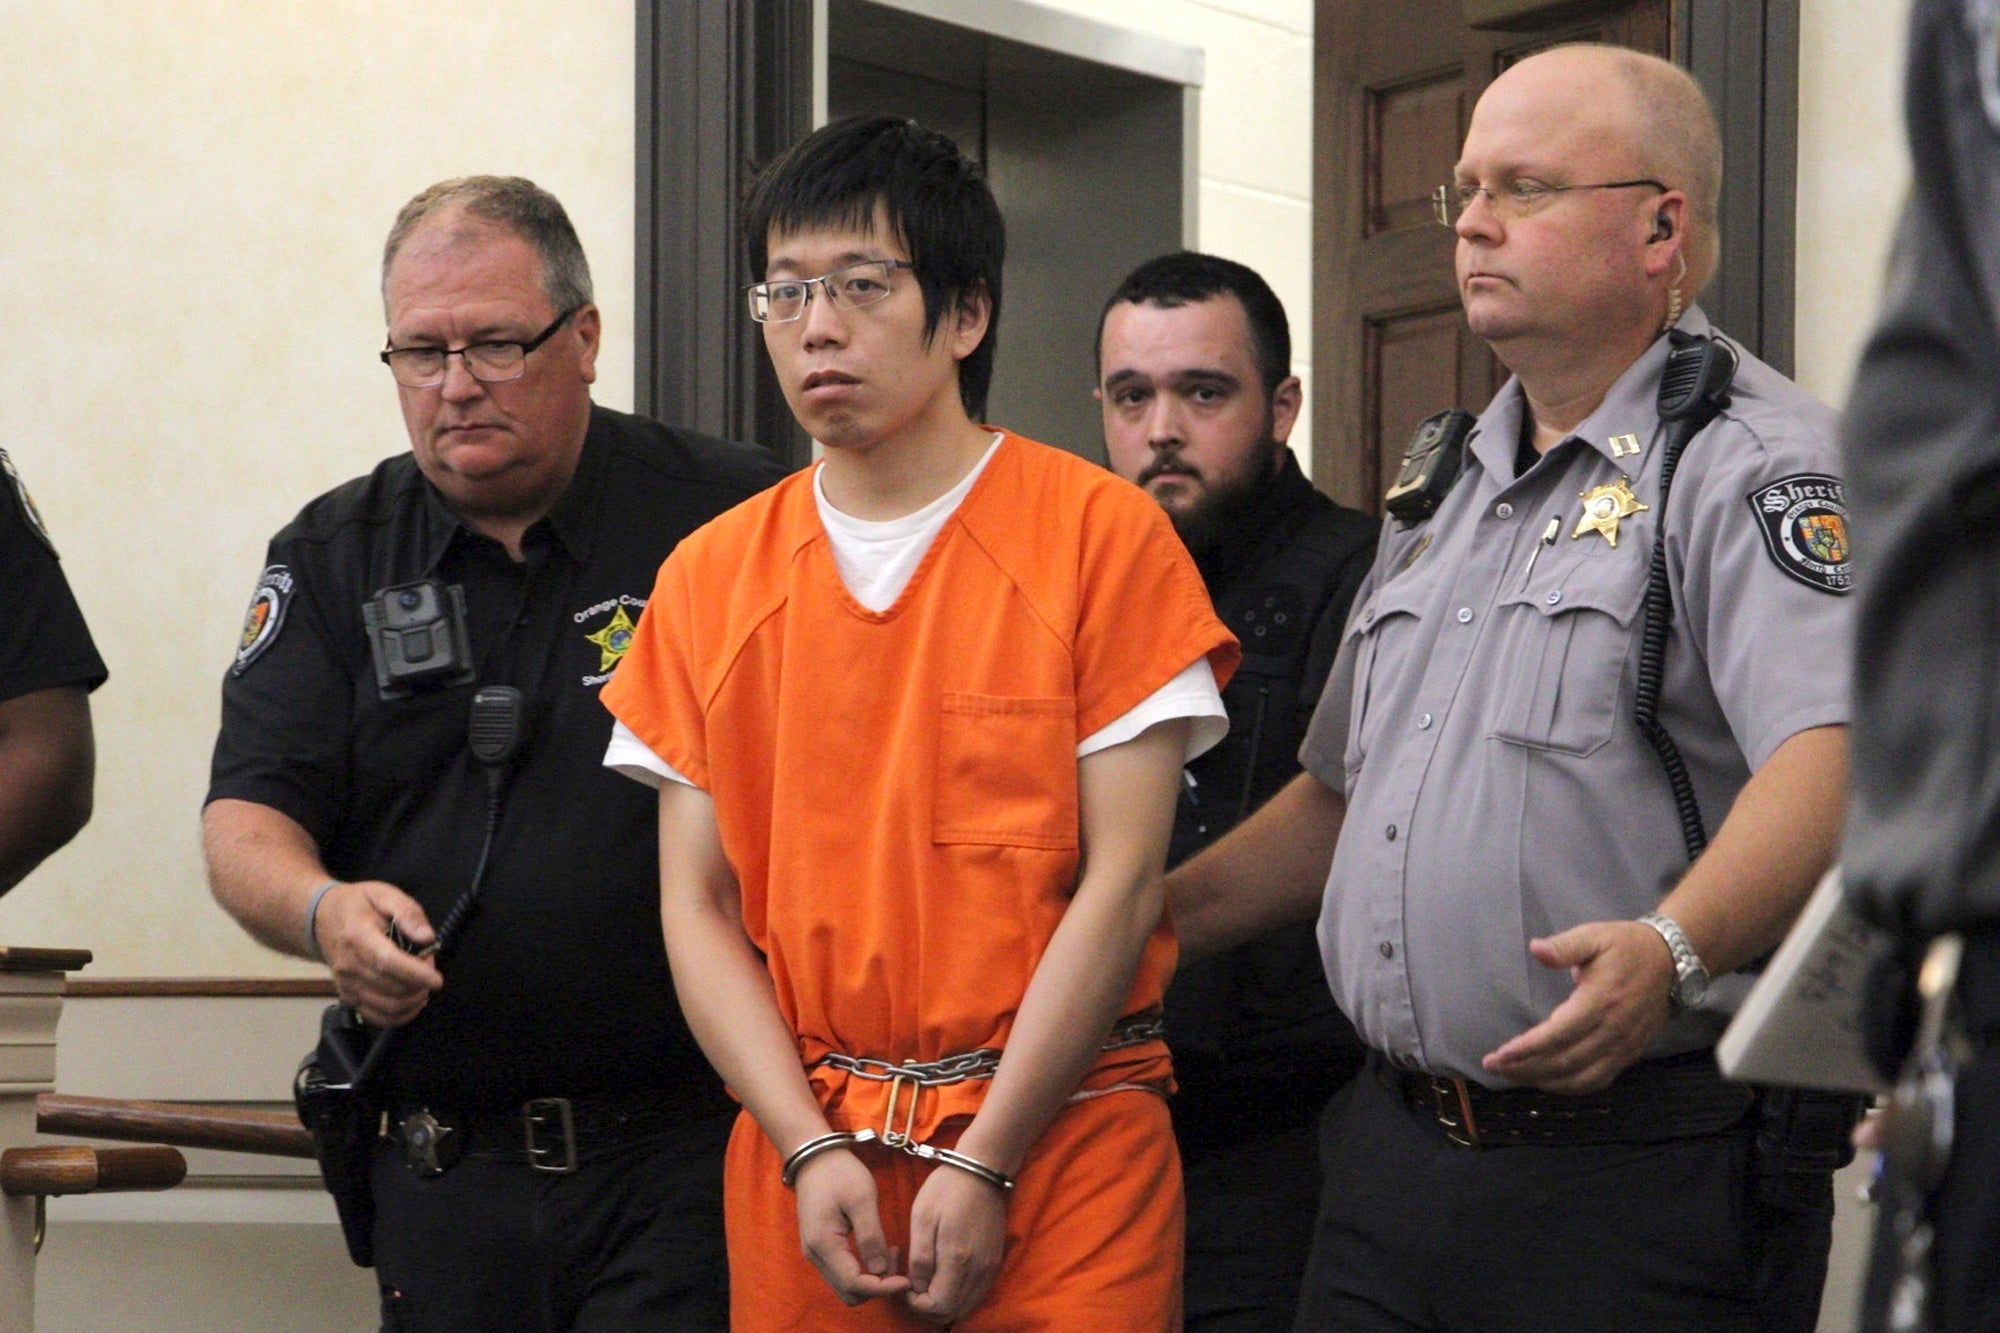 Tailei Qi, the graduate student suspected in the fatal shooting of a University of North Carolina at Chapel Hill faculty member, makes his first appearance at the Orange County Courthouse